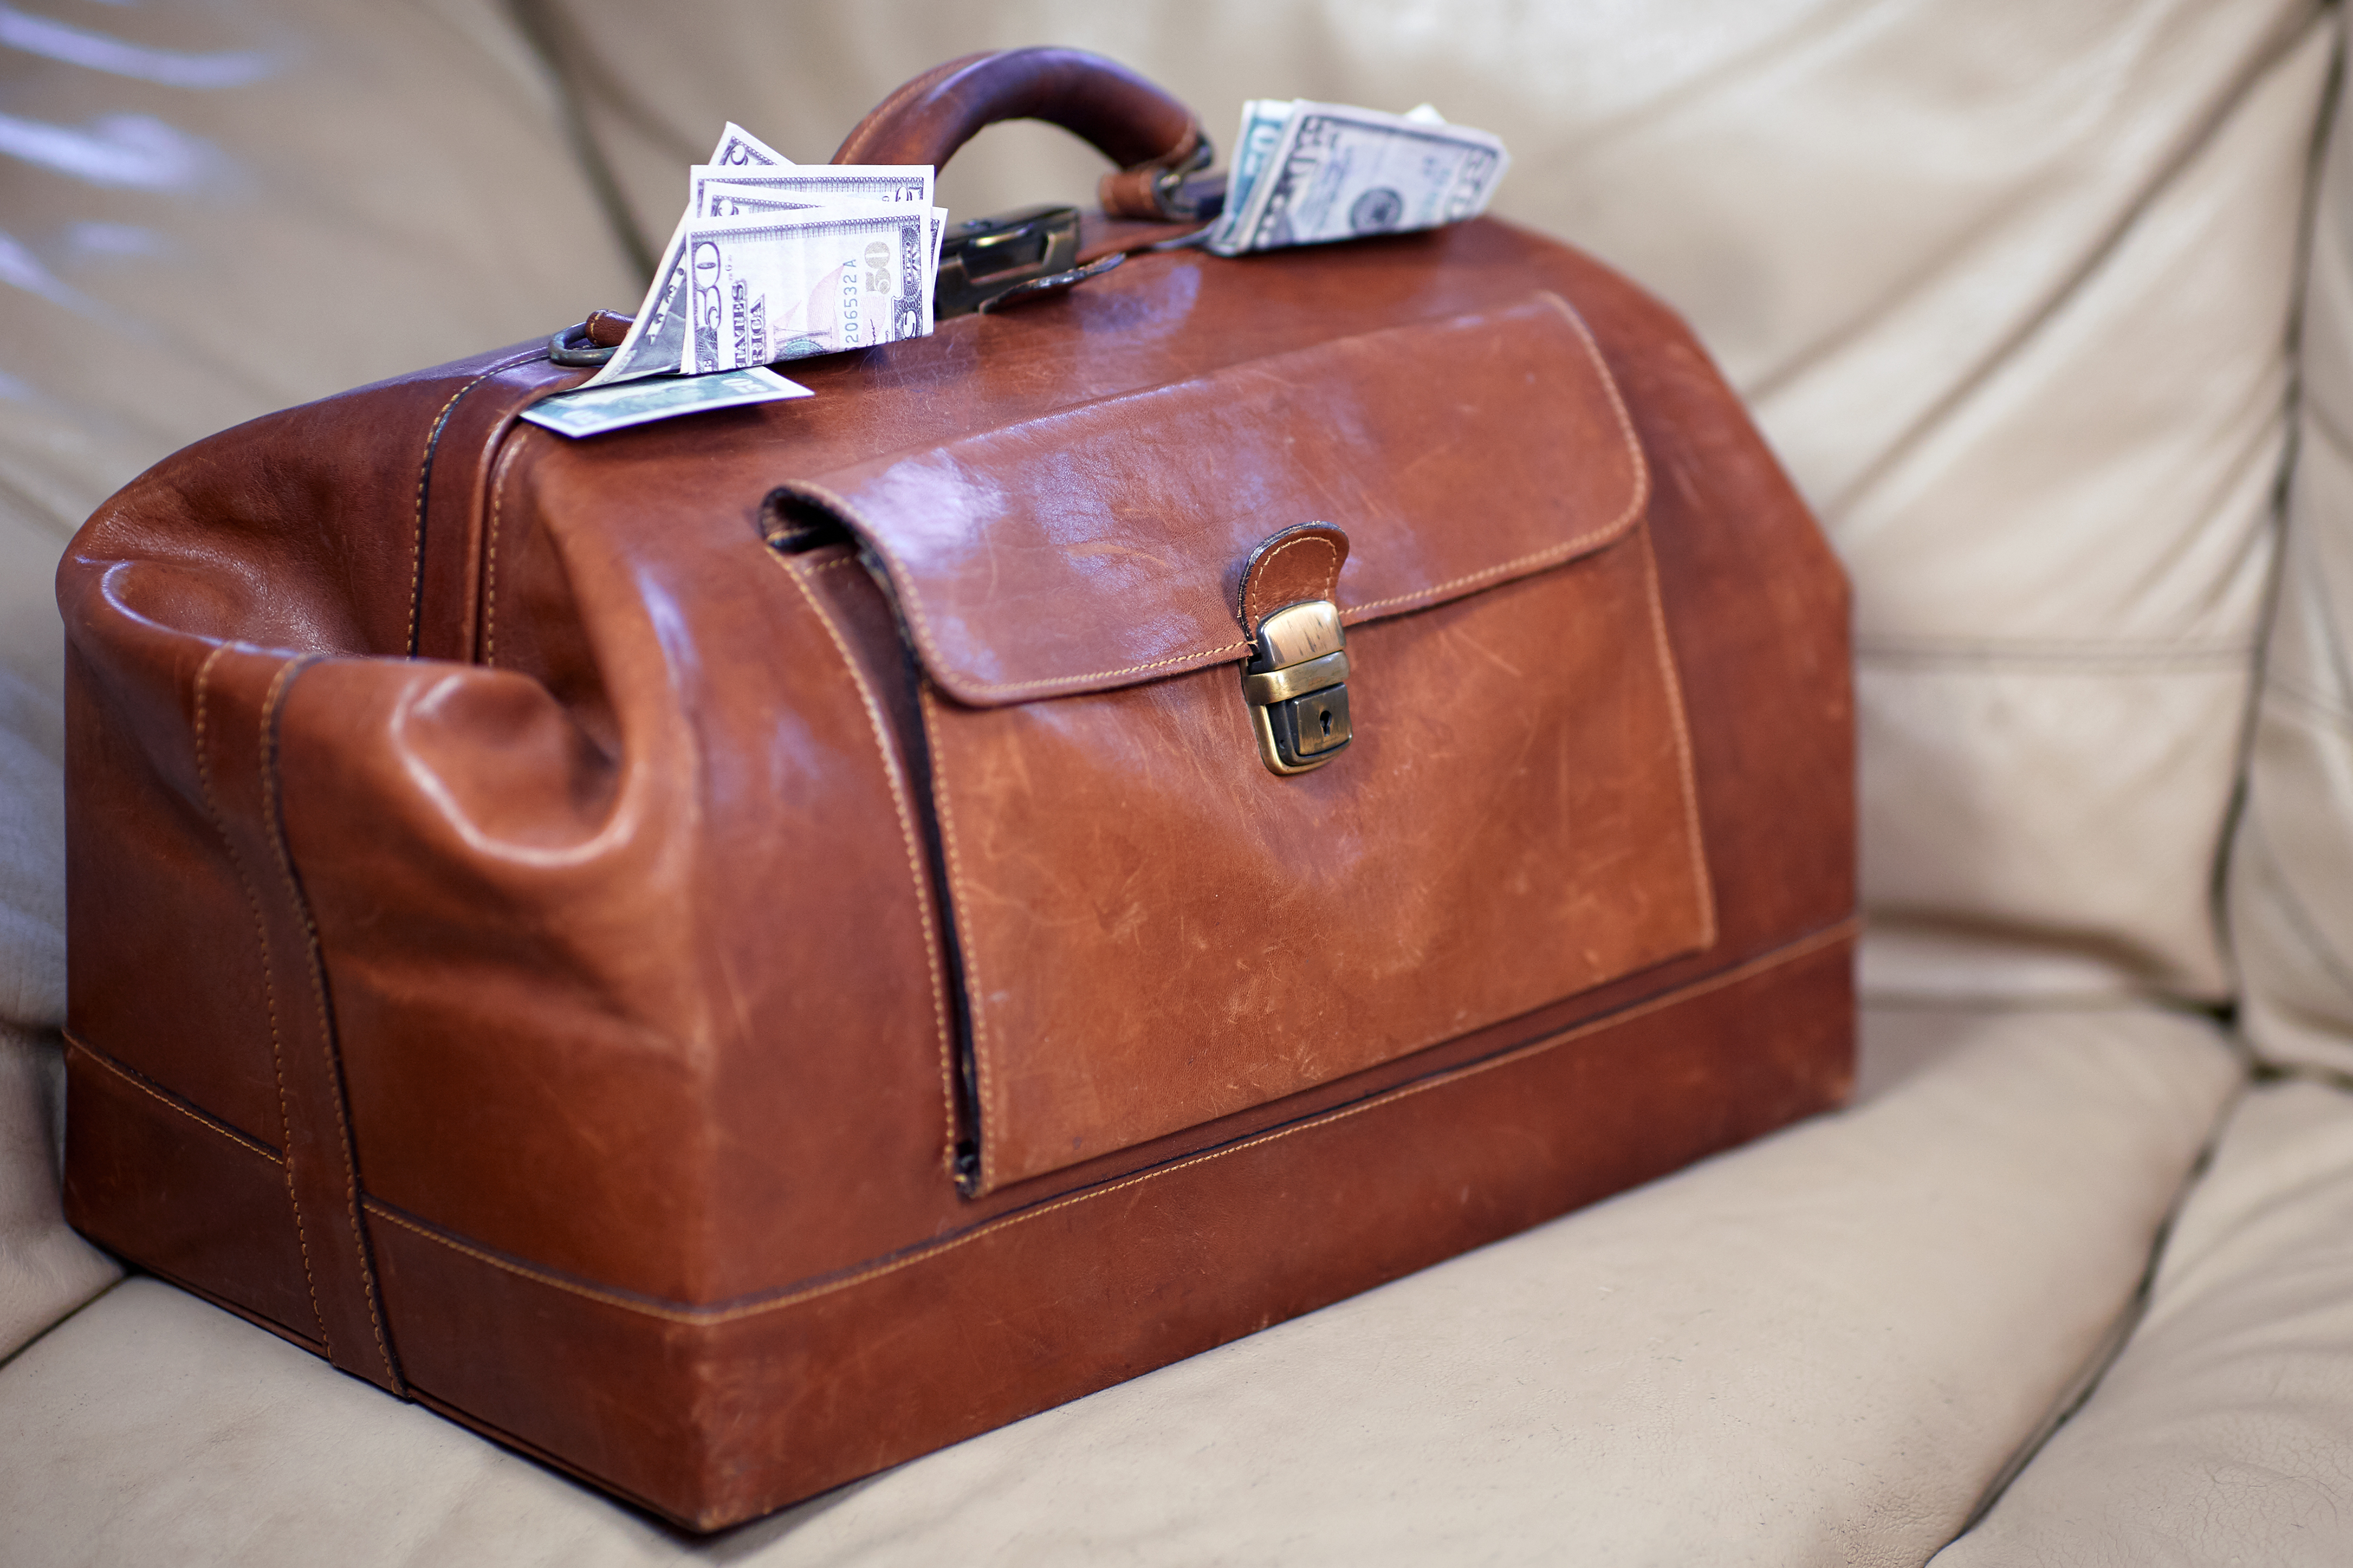 Old vintage red leather case full of money | Source: Shutterstock